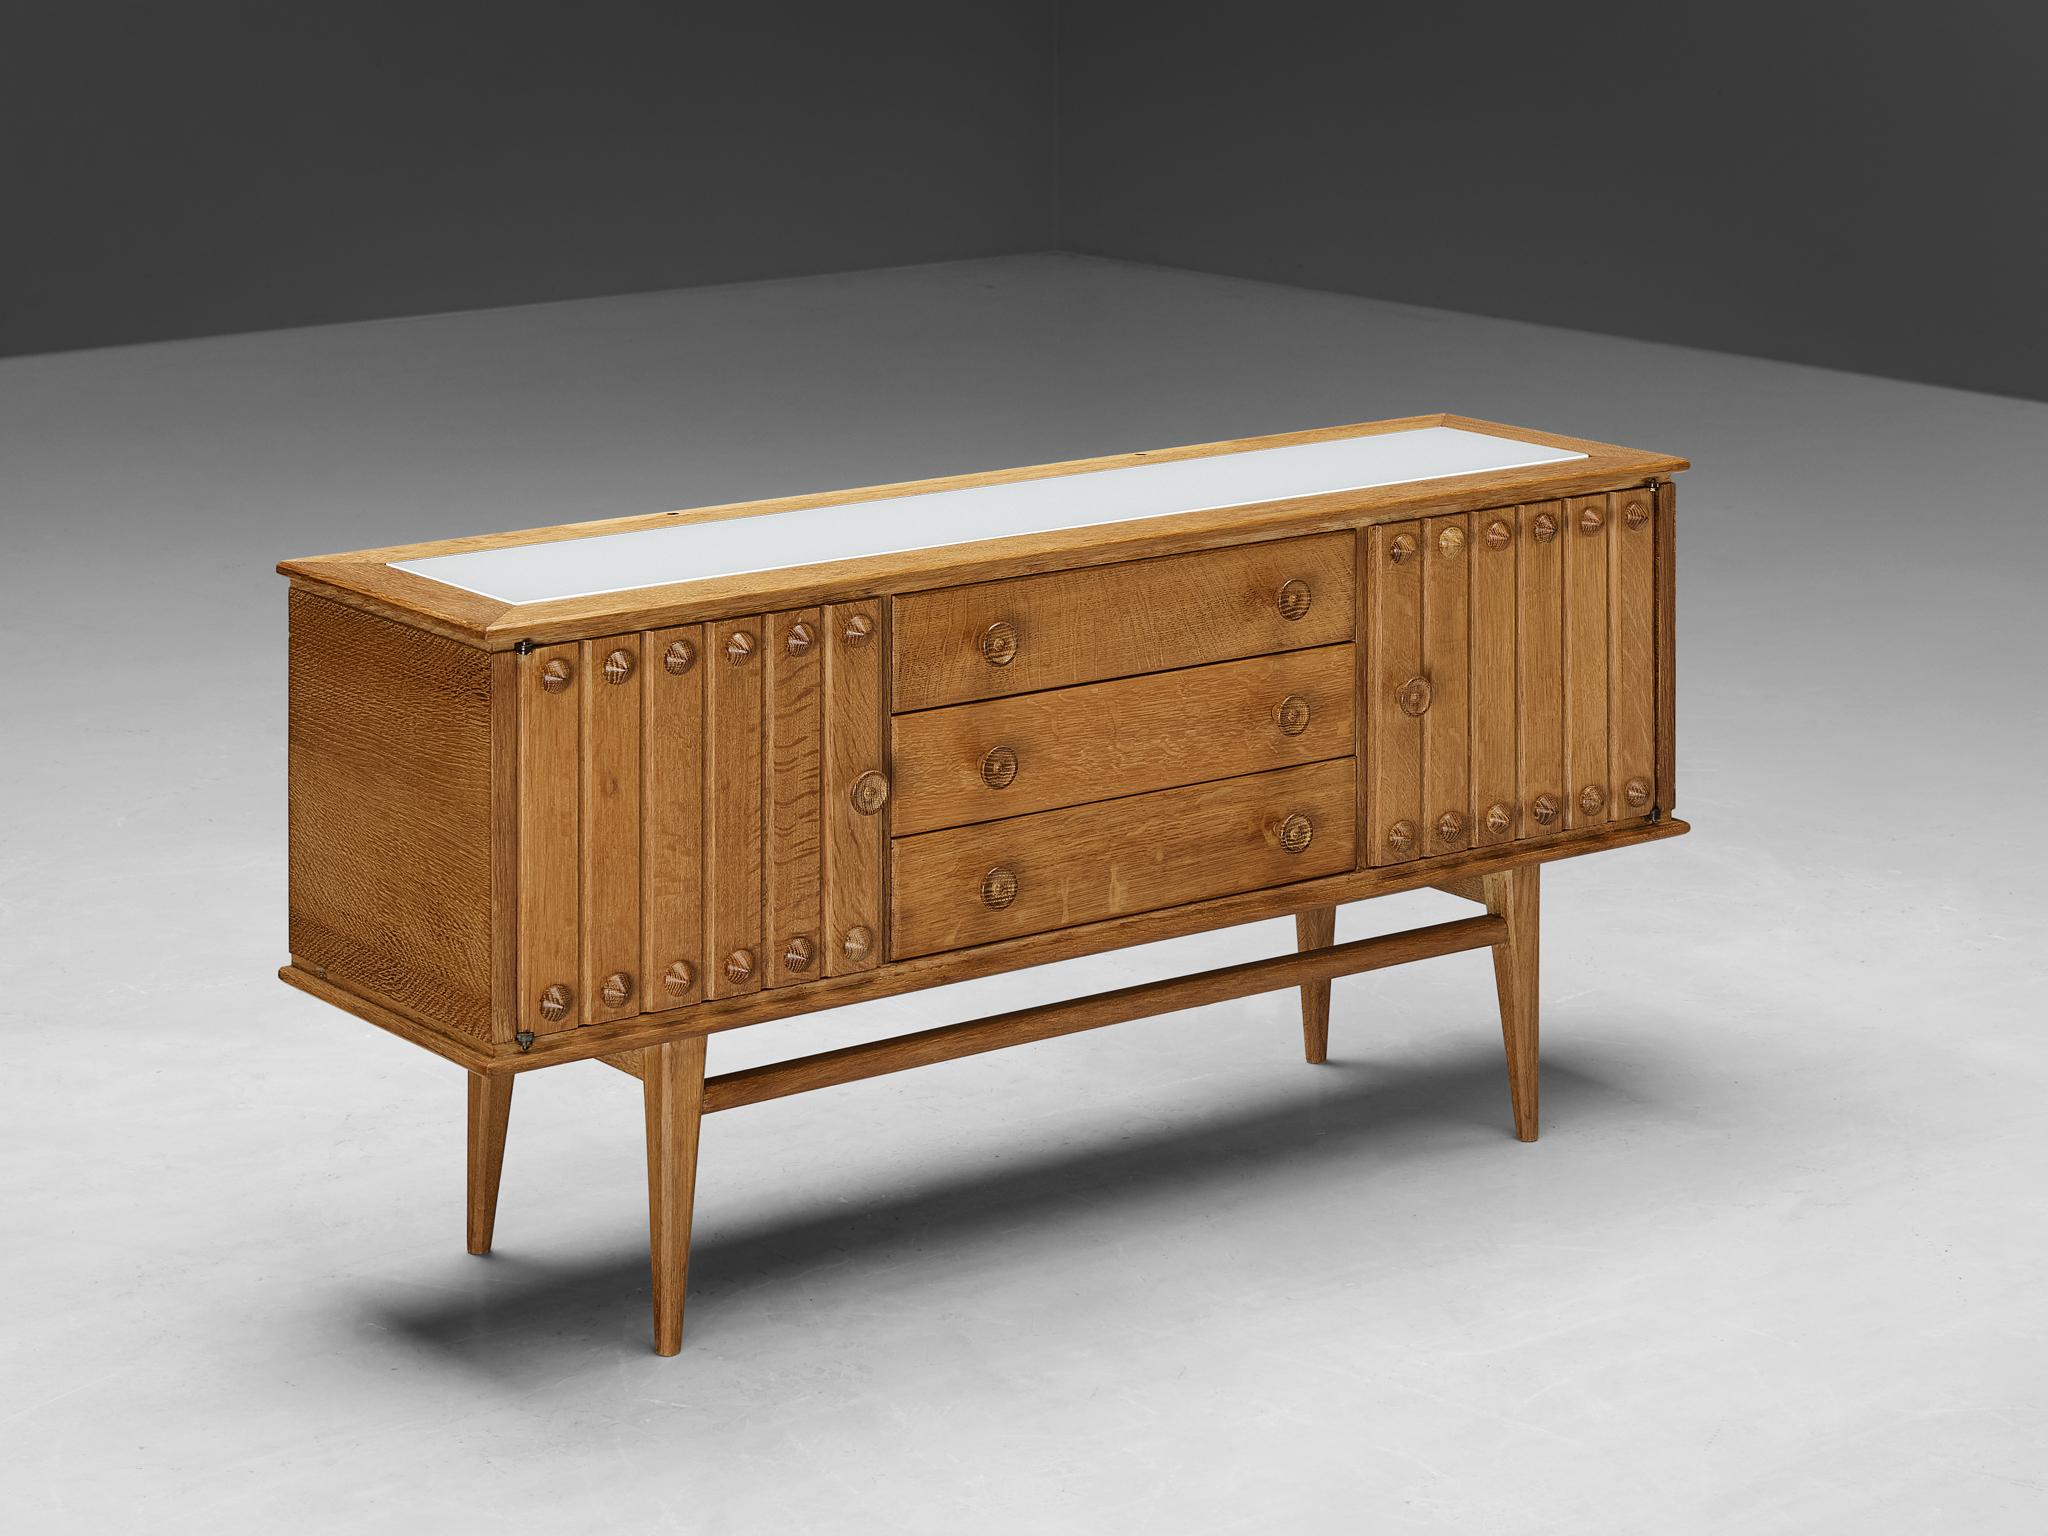 Vanity, oak, brass, France, 1960s

French vanity with large mirror made in oak with beautiful grain and detailing. With the vividly designed fronts and the functional and versatile storage facilities this high-quality piece of furniture serves both